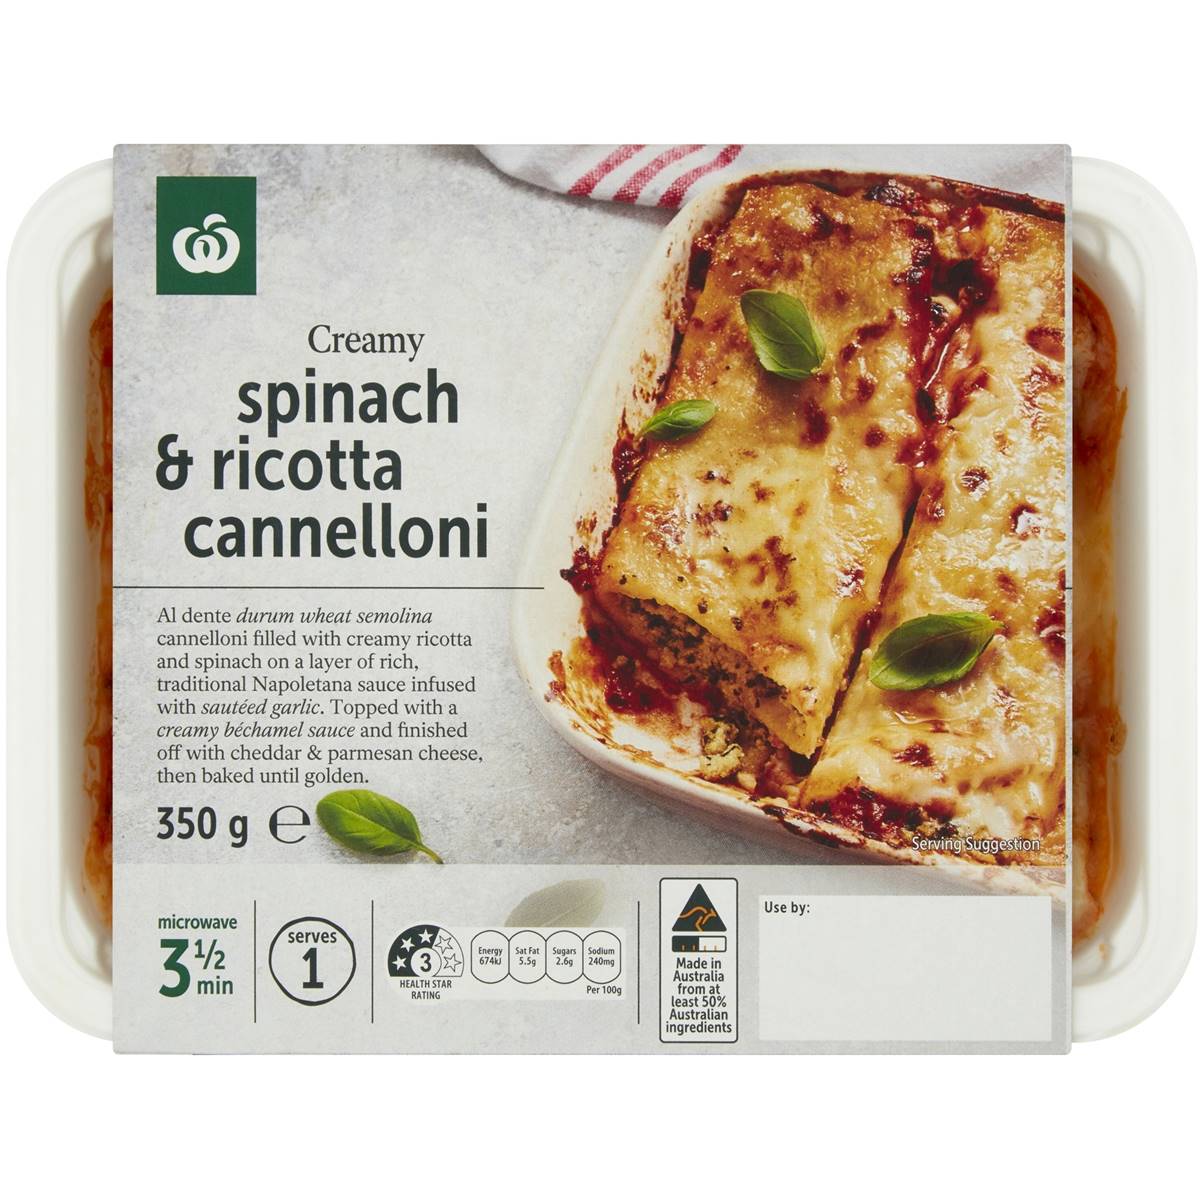 Calories in Woolworths Creamy Spinach & Ricotta Cannelloni Chilled Meal